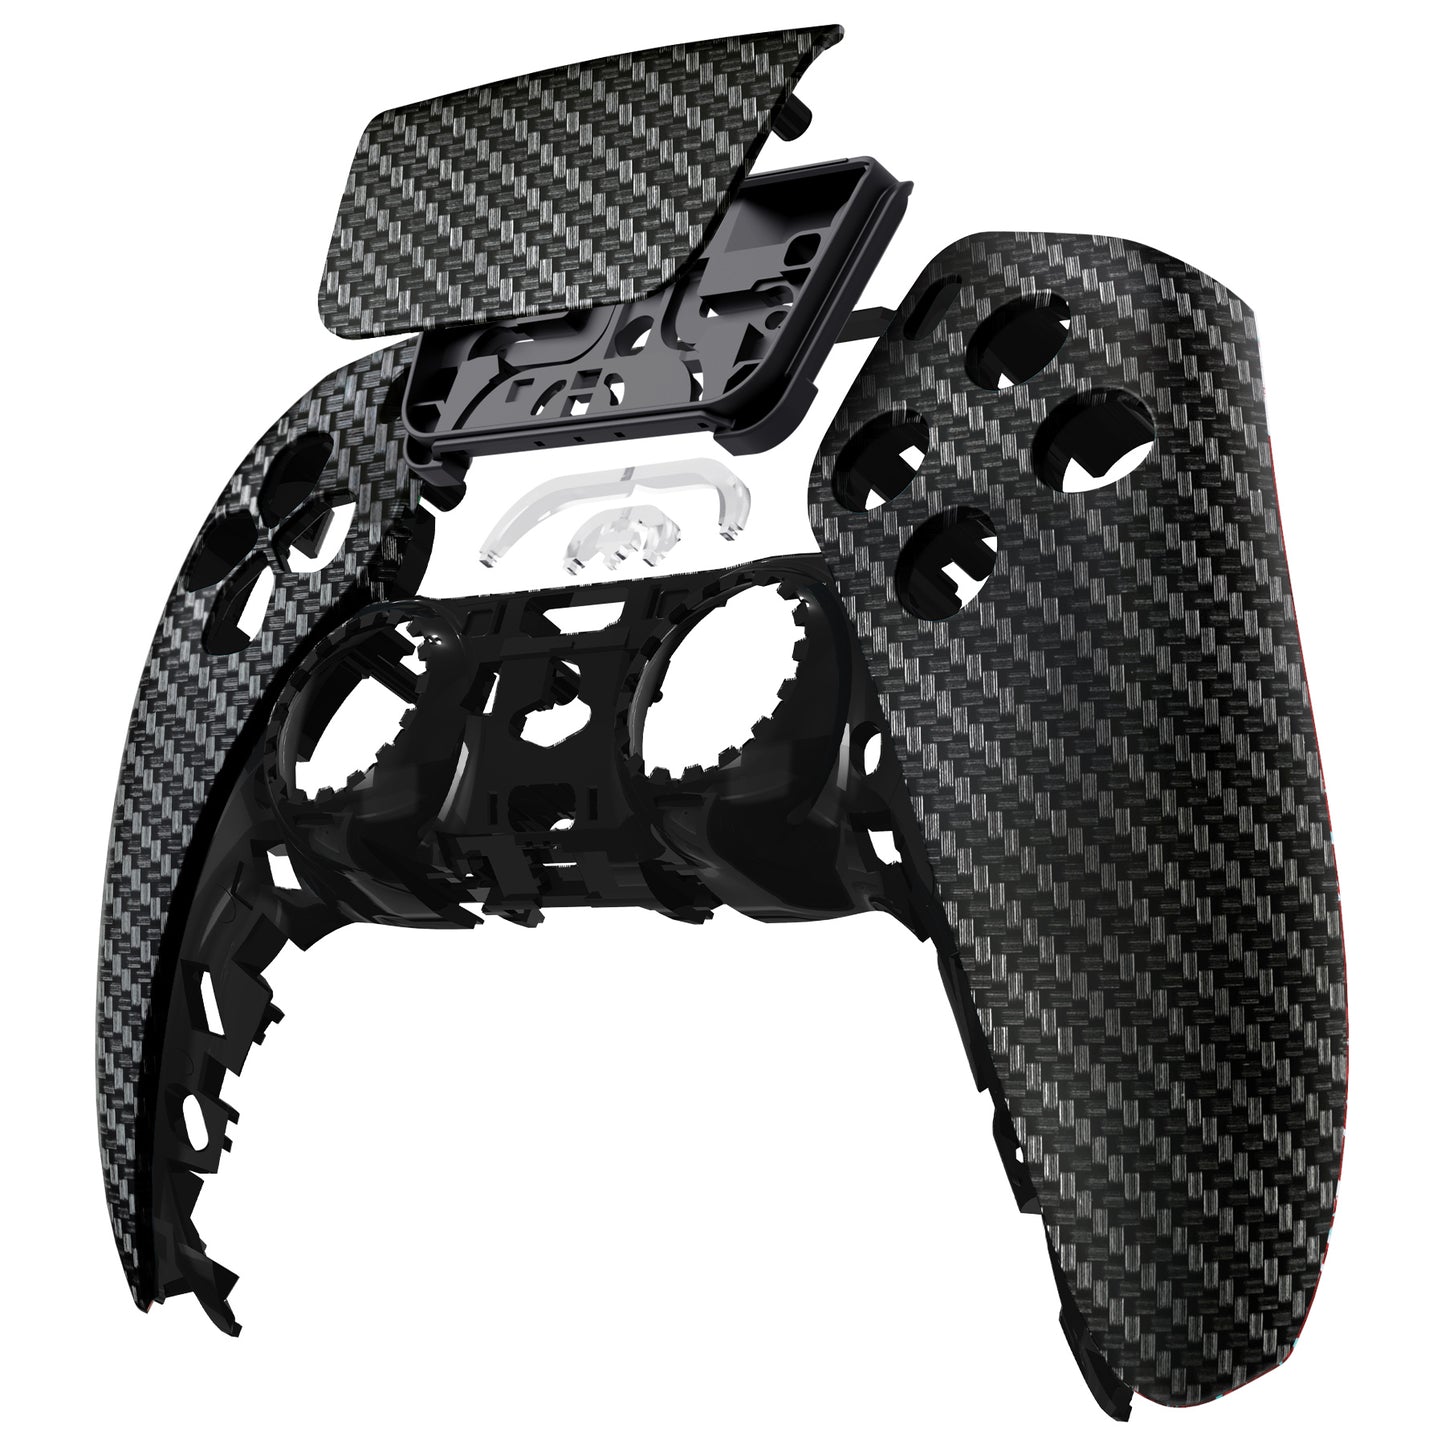 eXtremeRate Retail Black Silver Carbon Fiber Touchpad Front Housing Shell Compatible with ps5 Controller BDM-010 BDM-020 BDM-030, DIY Replacement Shell Custom Touch Pad Cover Compatible with ps5 Controller - ZPFS2009G3